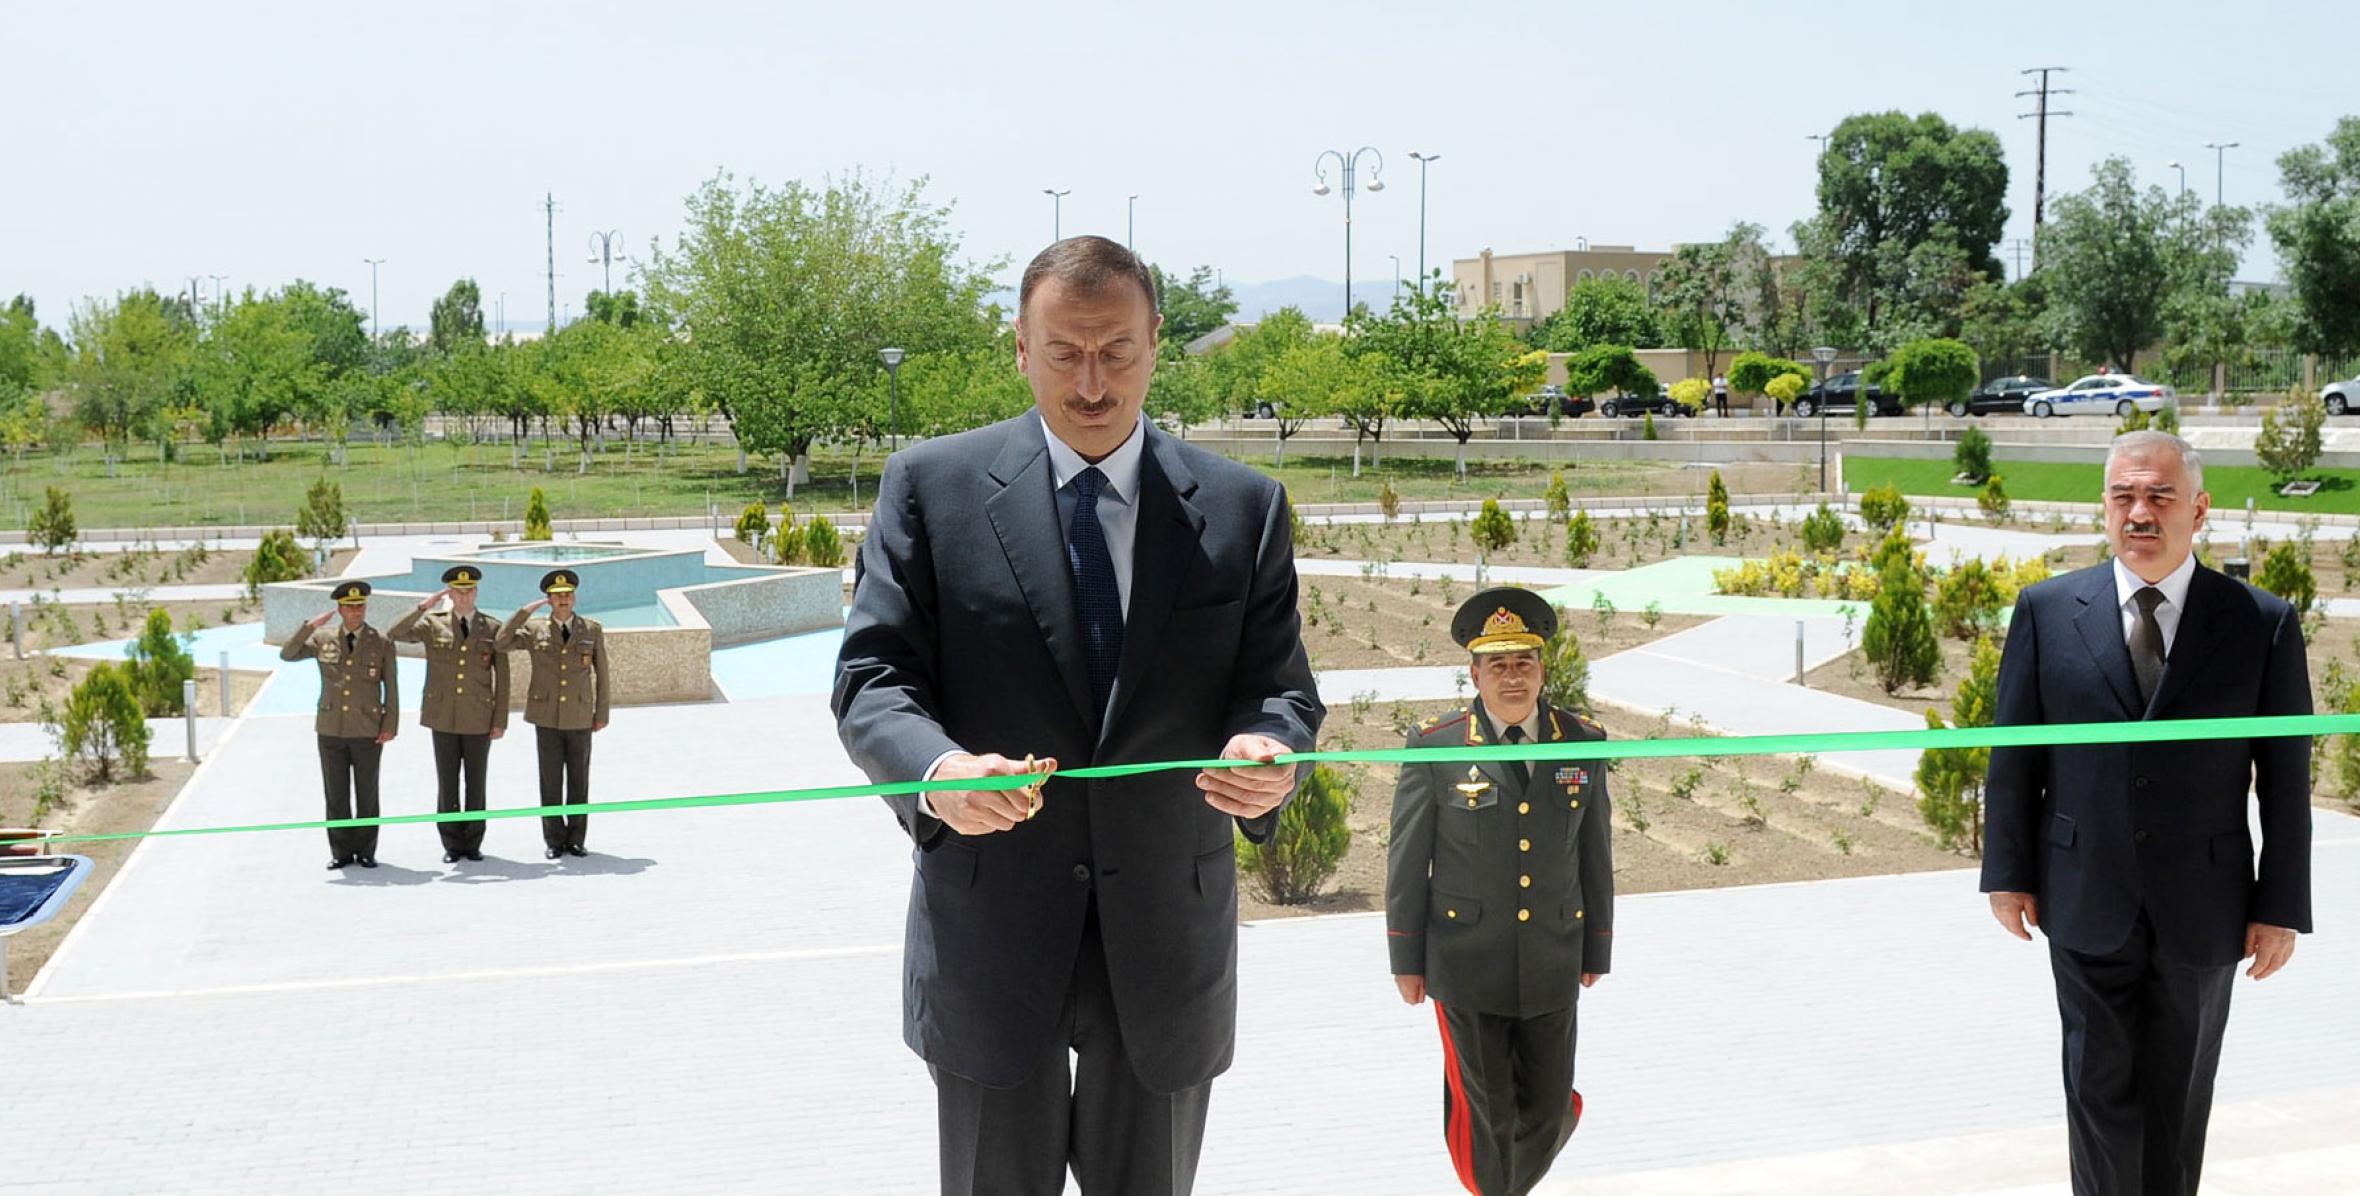 Ilham Aliyev attended the opening of a new office building of the Ministry of Emergency Situations of the Nakhchivan Autonomous Republic